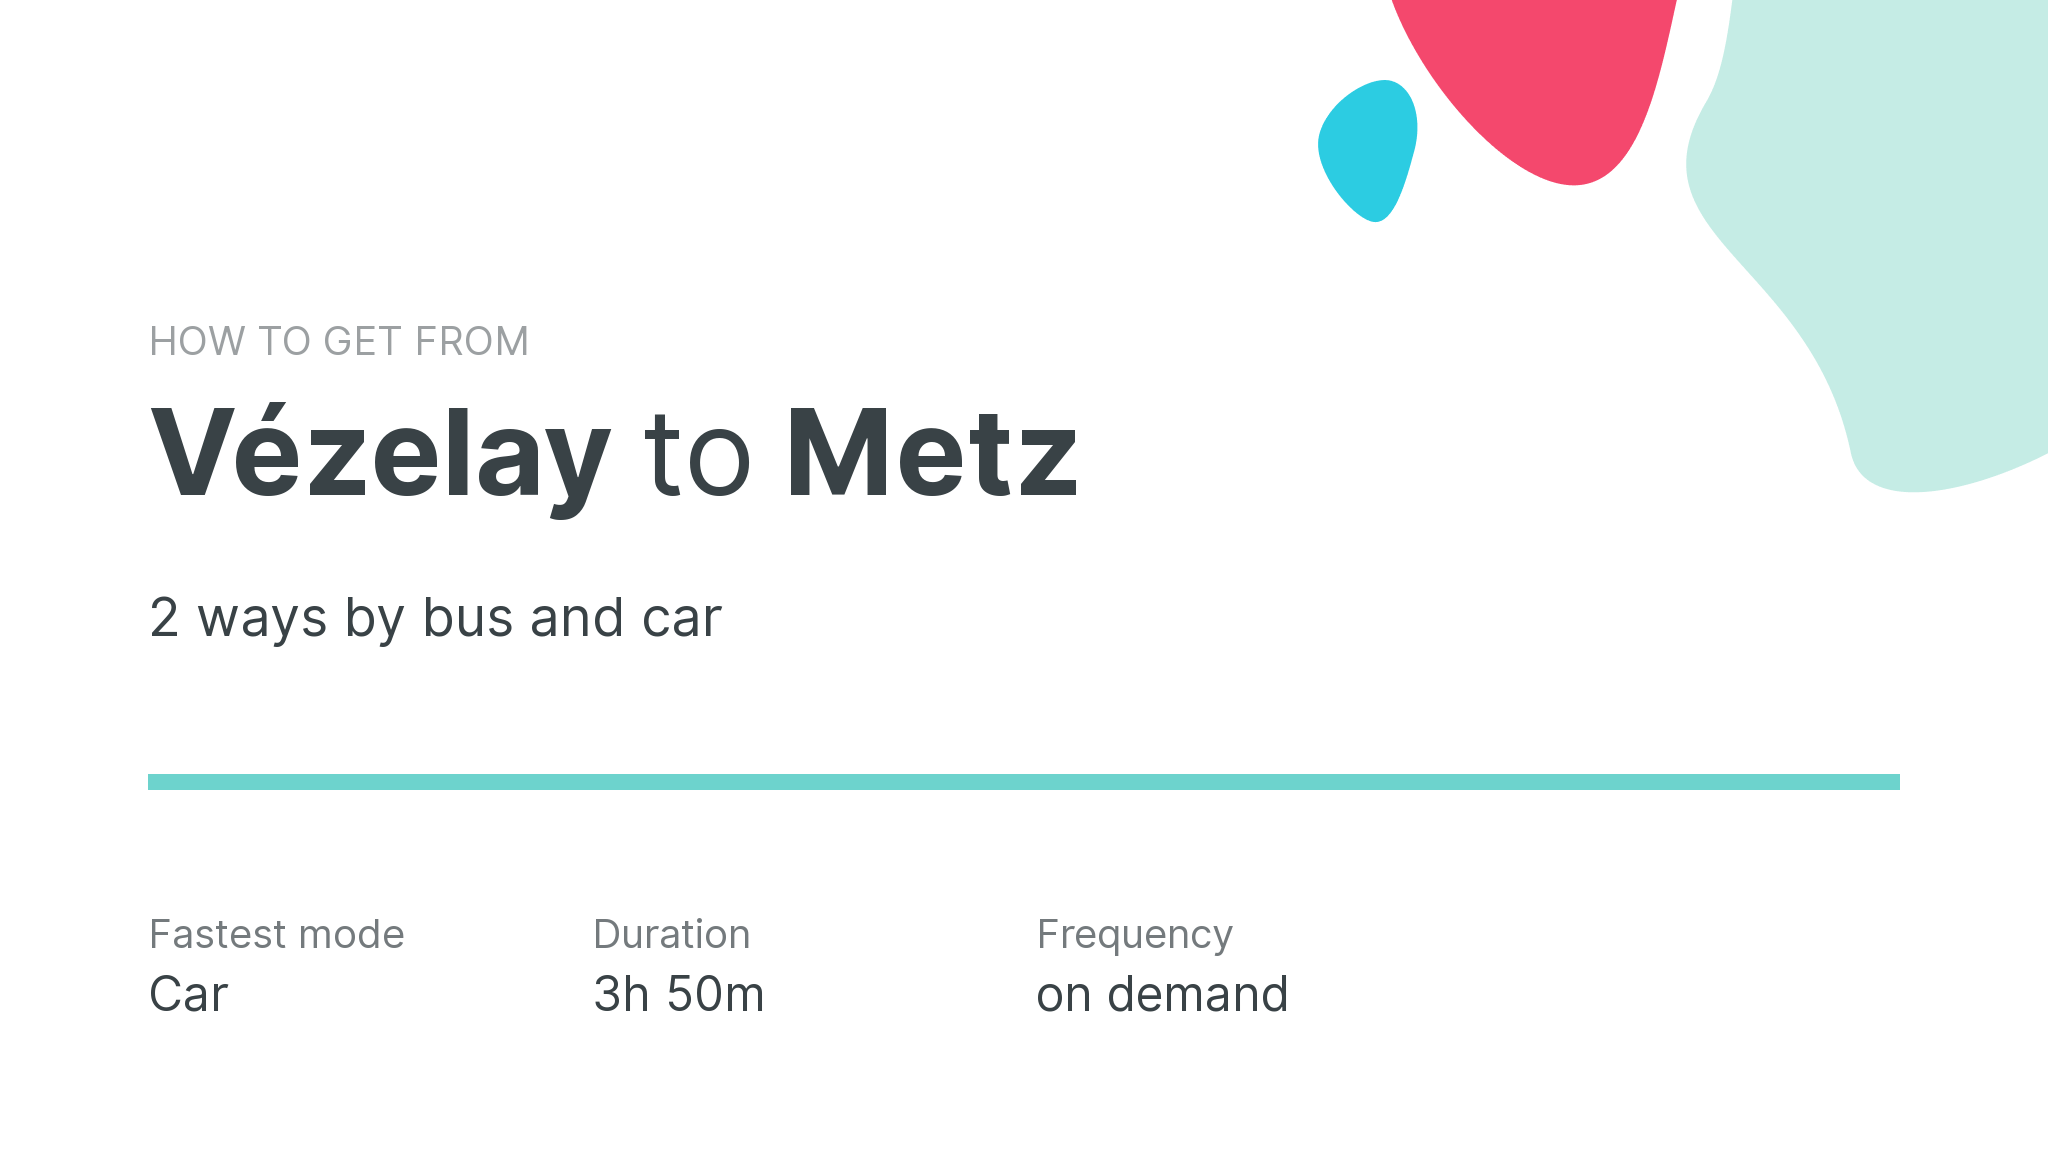 How do I get from Vézelay to Metz